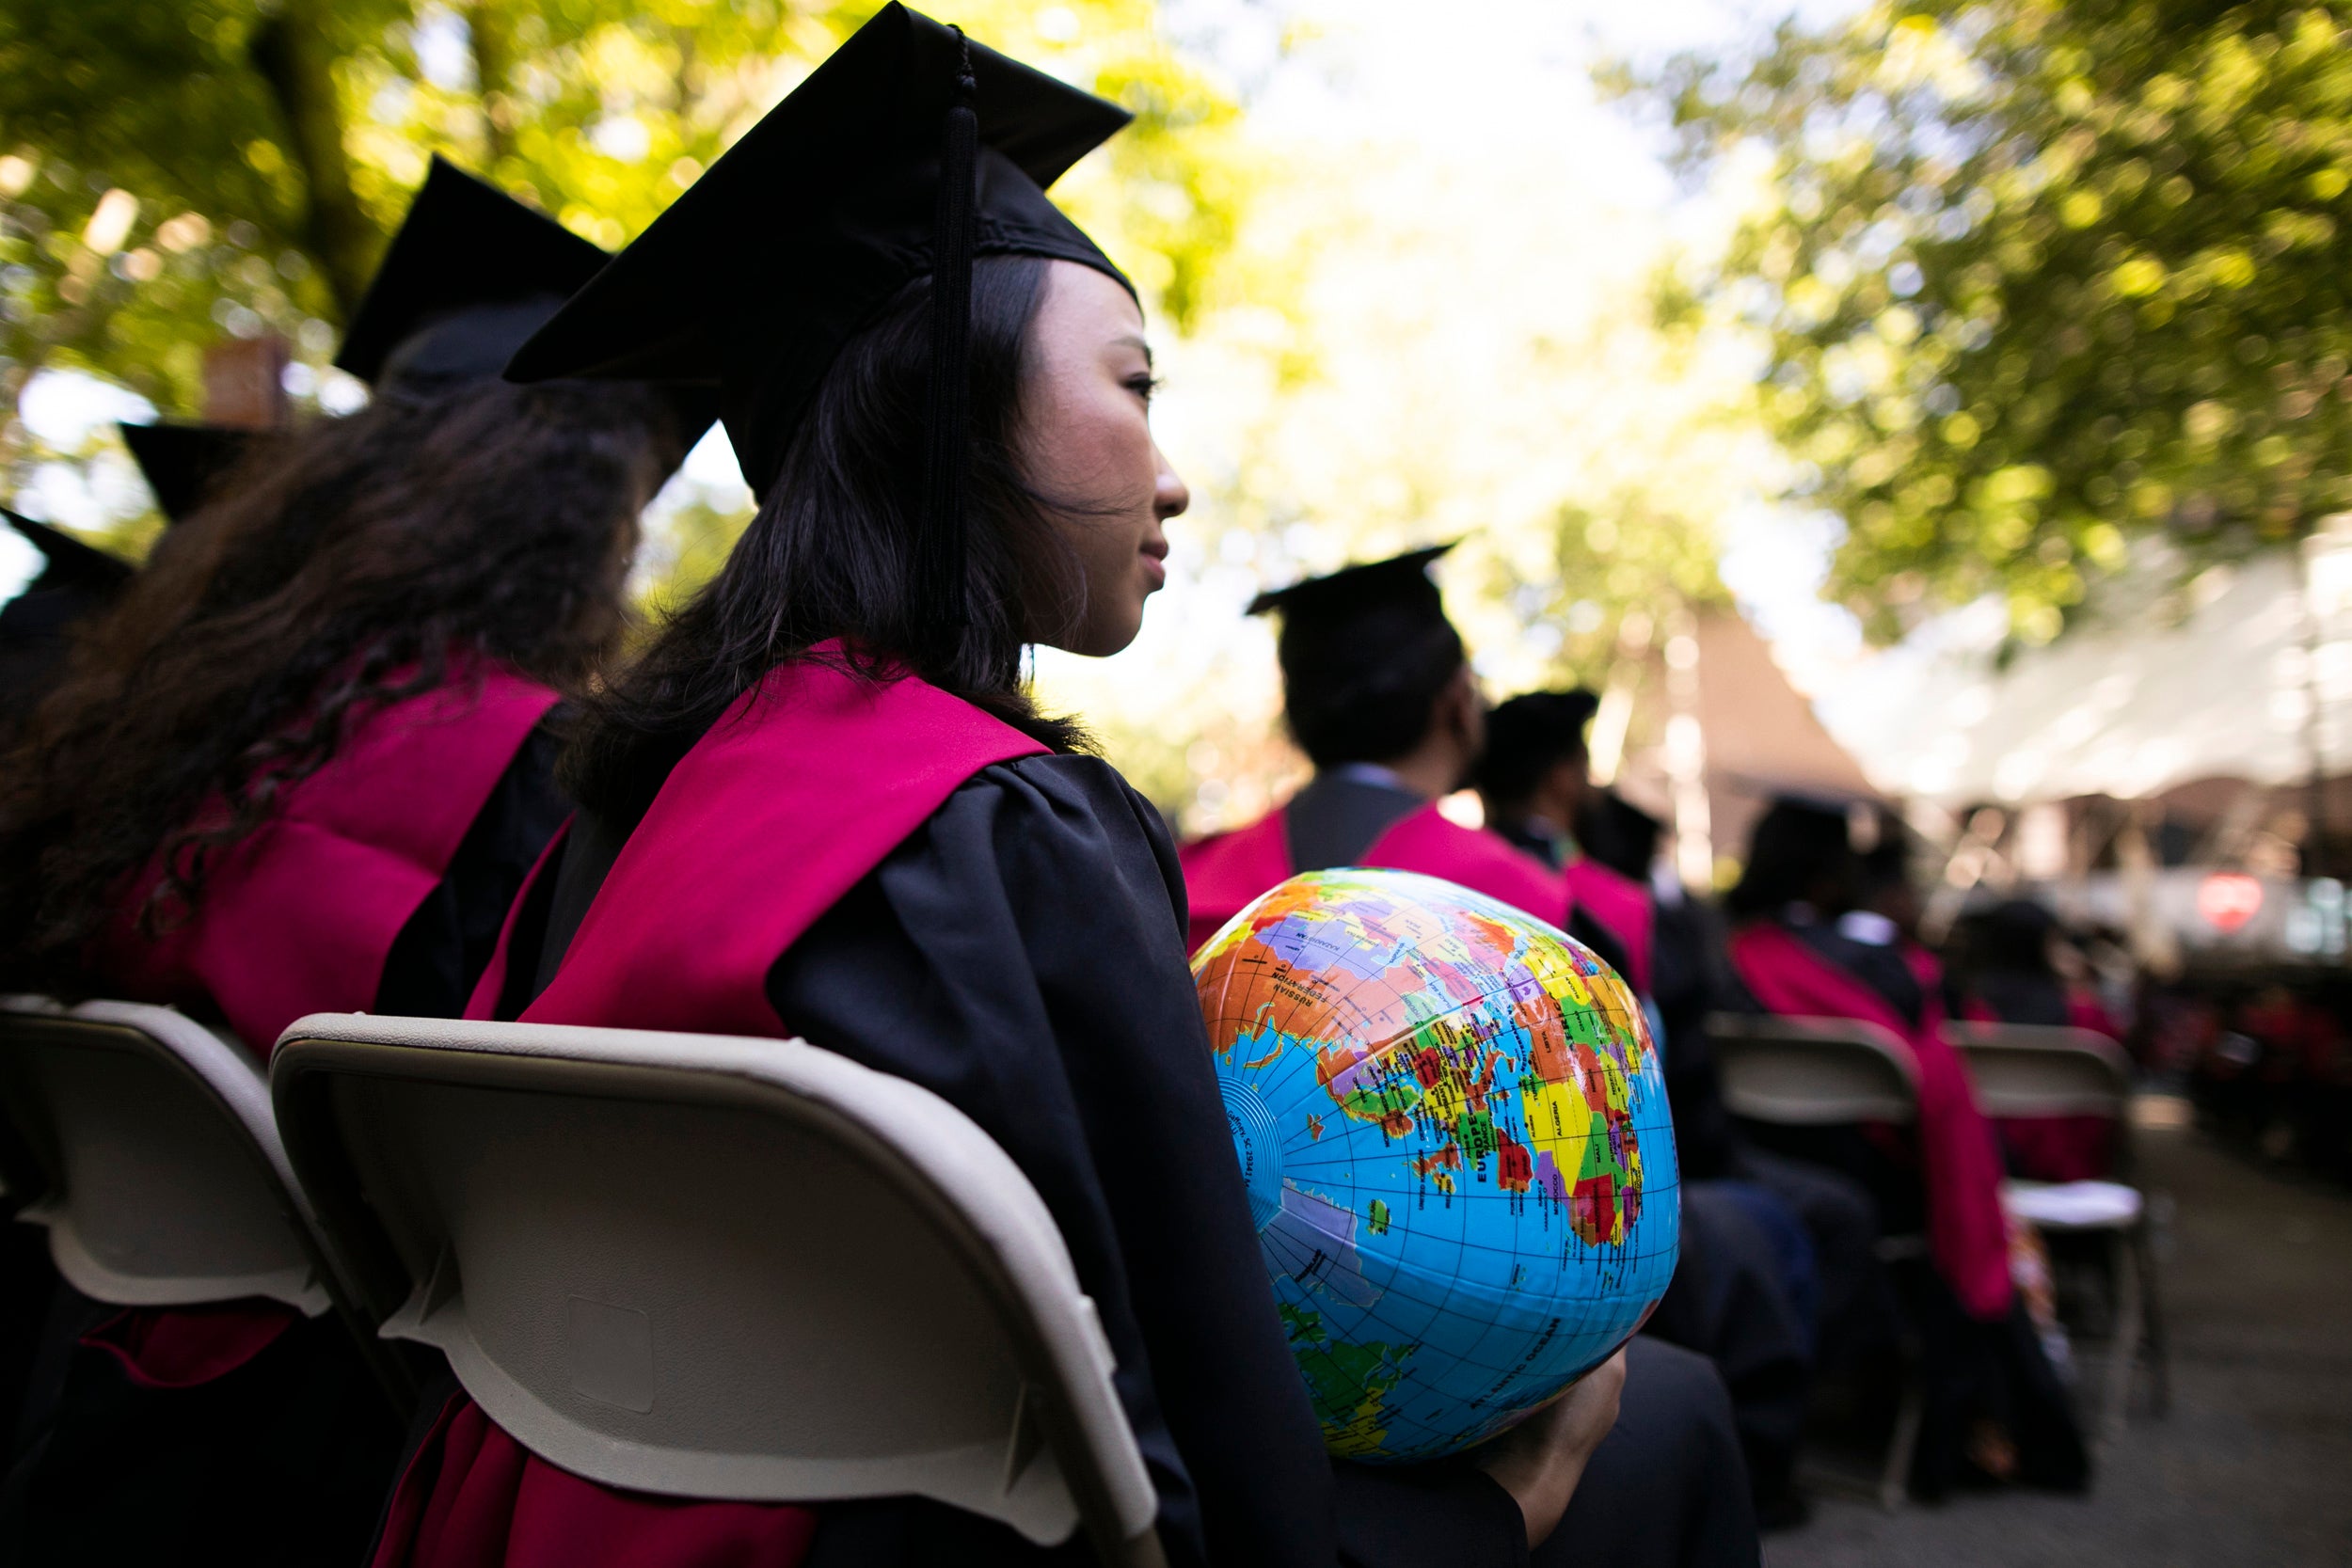 Jane Tjahjono HKS '20 is pictured holding a globe during the ceremony.